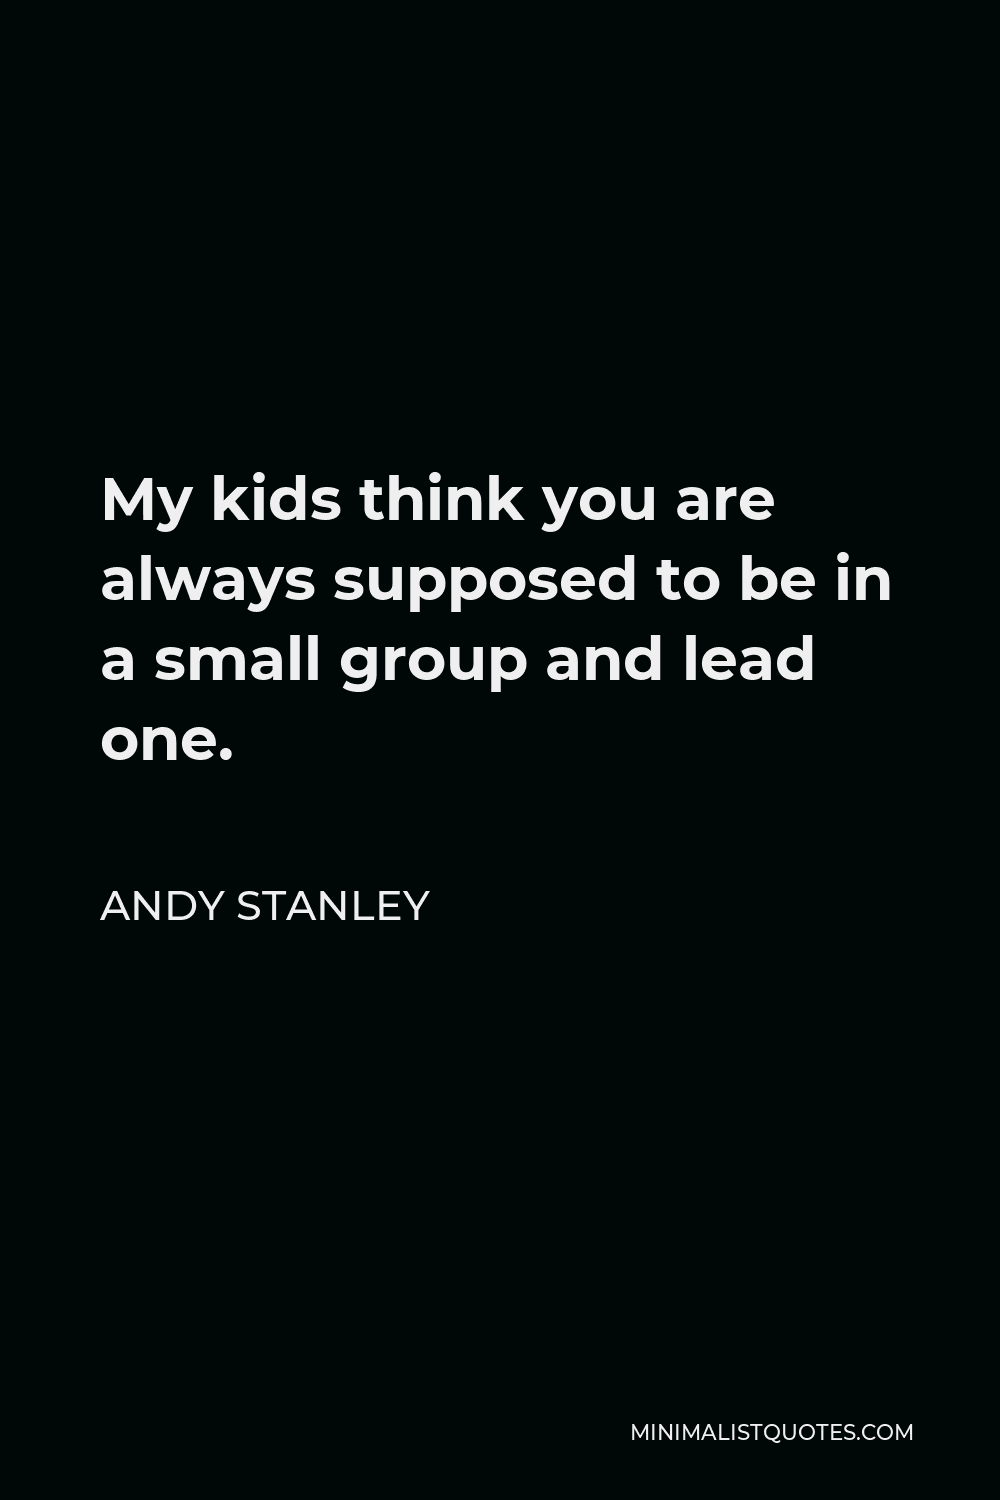 Andy Stanley Quote - My kids think you are always supposed to be in a small group and lead one.